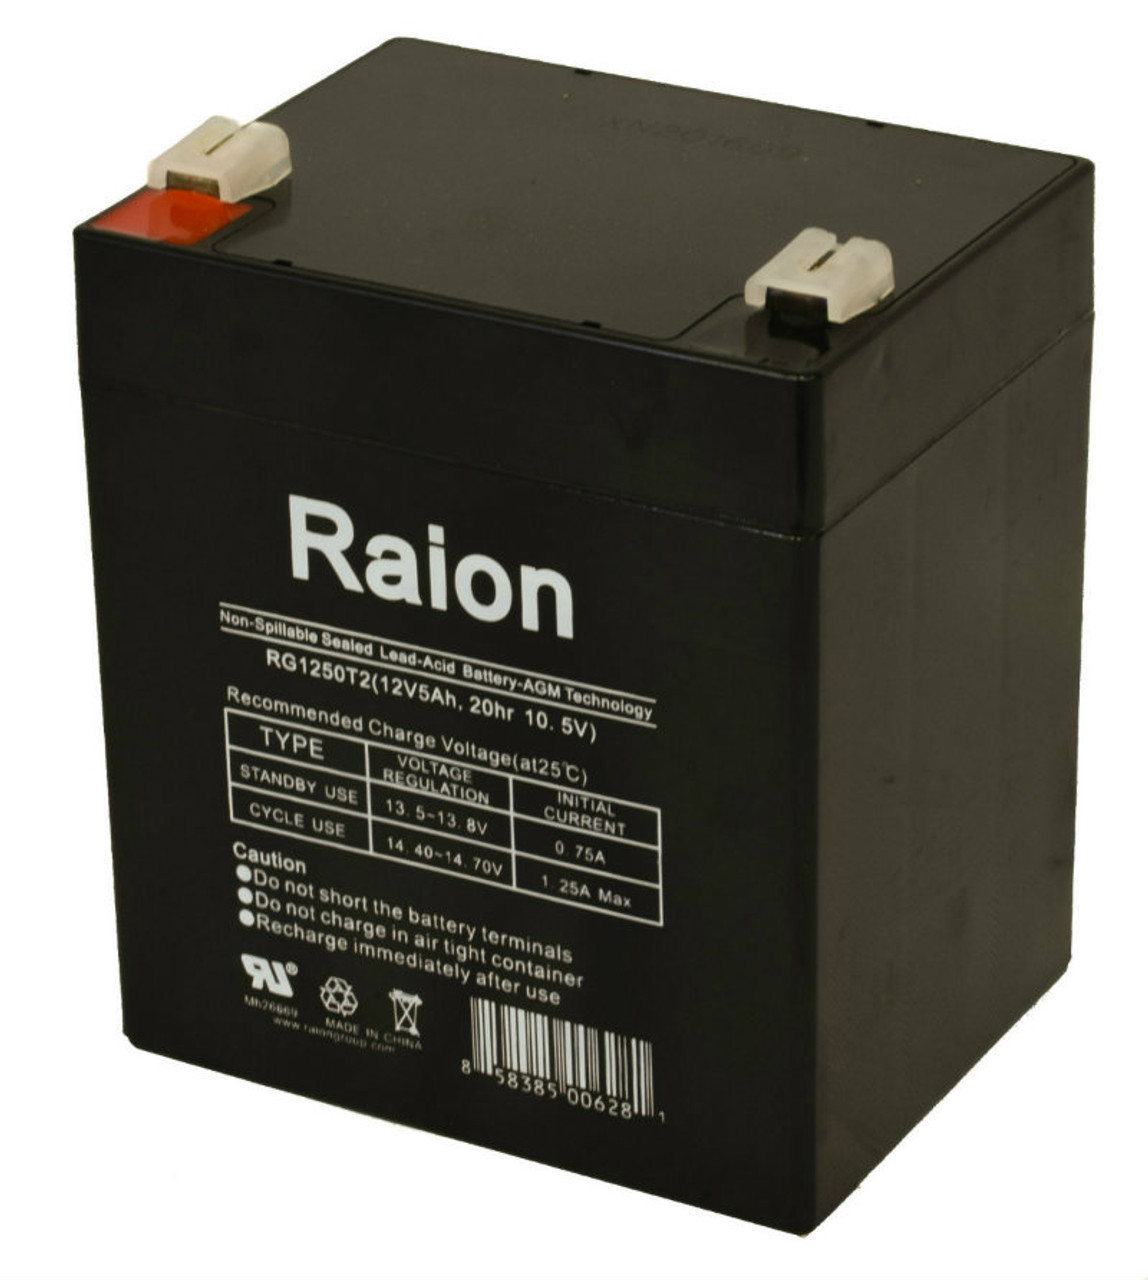 Raion Power 12V 5Ah SLA Battery With T1 Terminals For NPP Power NP12-5Ah